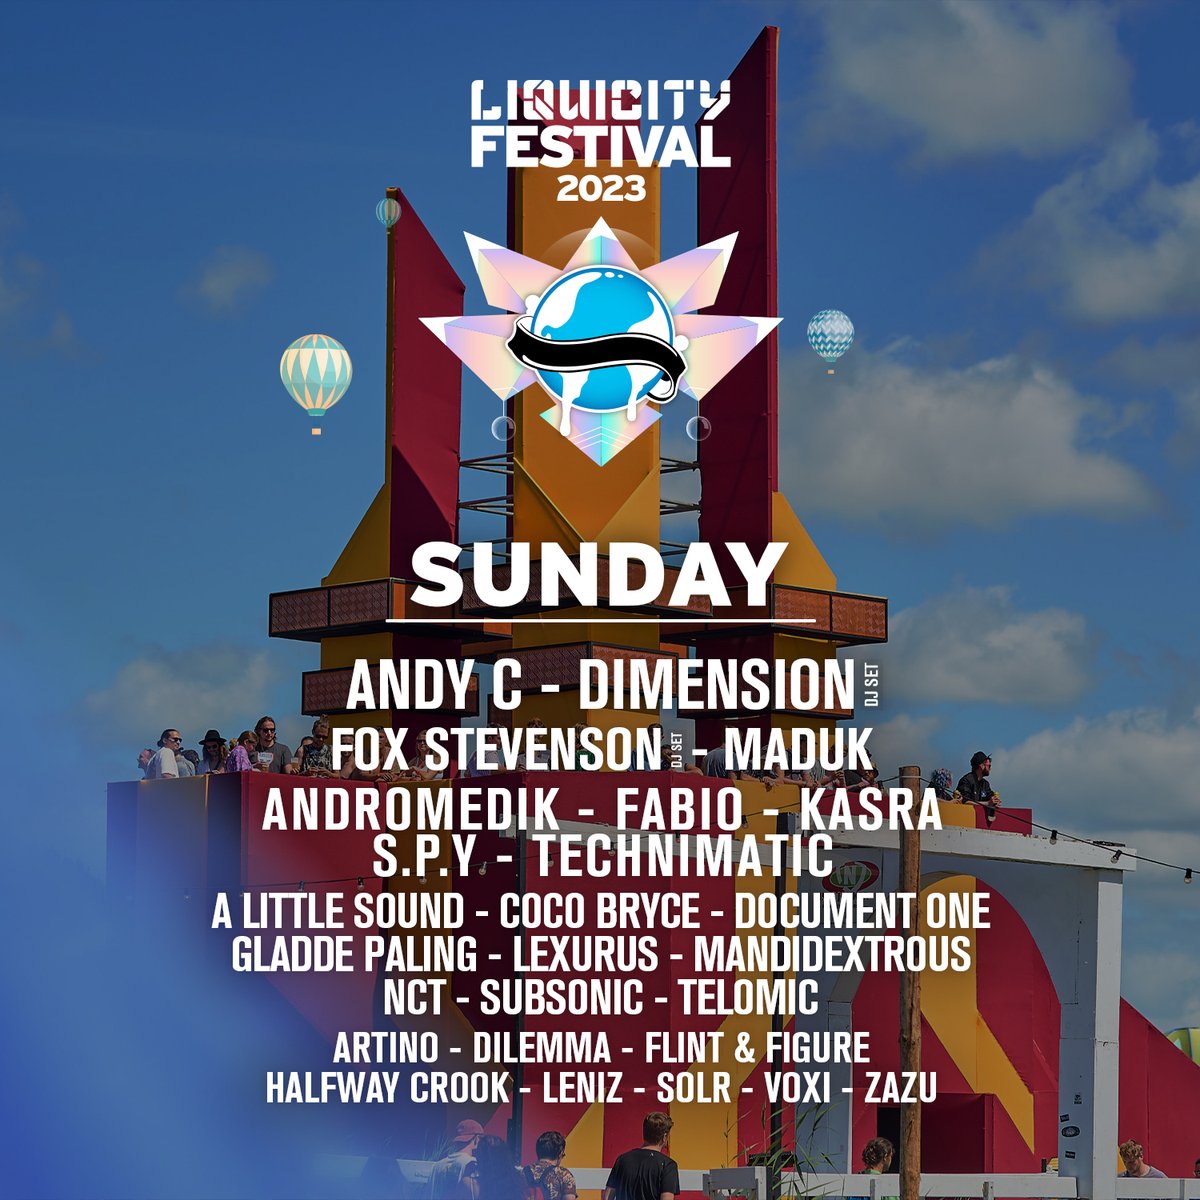 🔥 LIQUICITY FESTIVAL 2023 | UPDATED FULL LINE-UP 🚀 Also check updated line-ups per day ➡️ More info & tickets: festival.liquicity.com